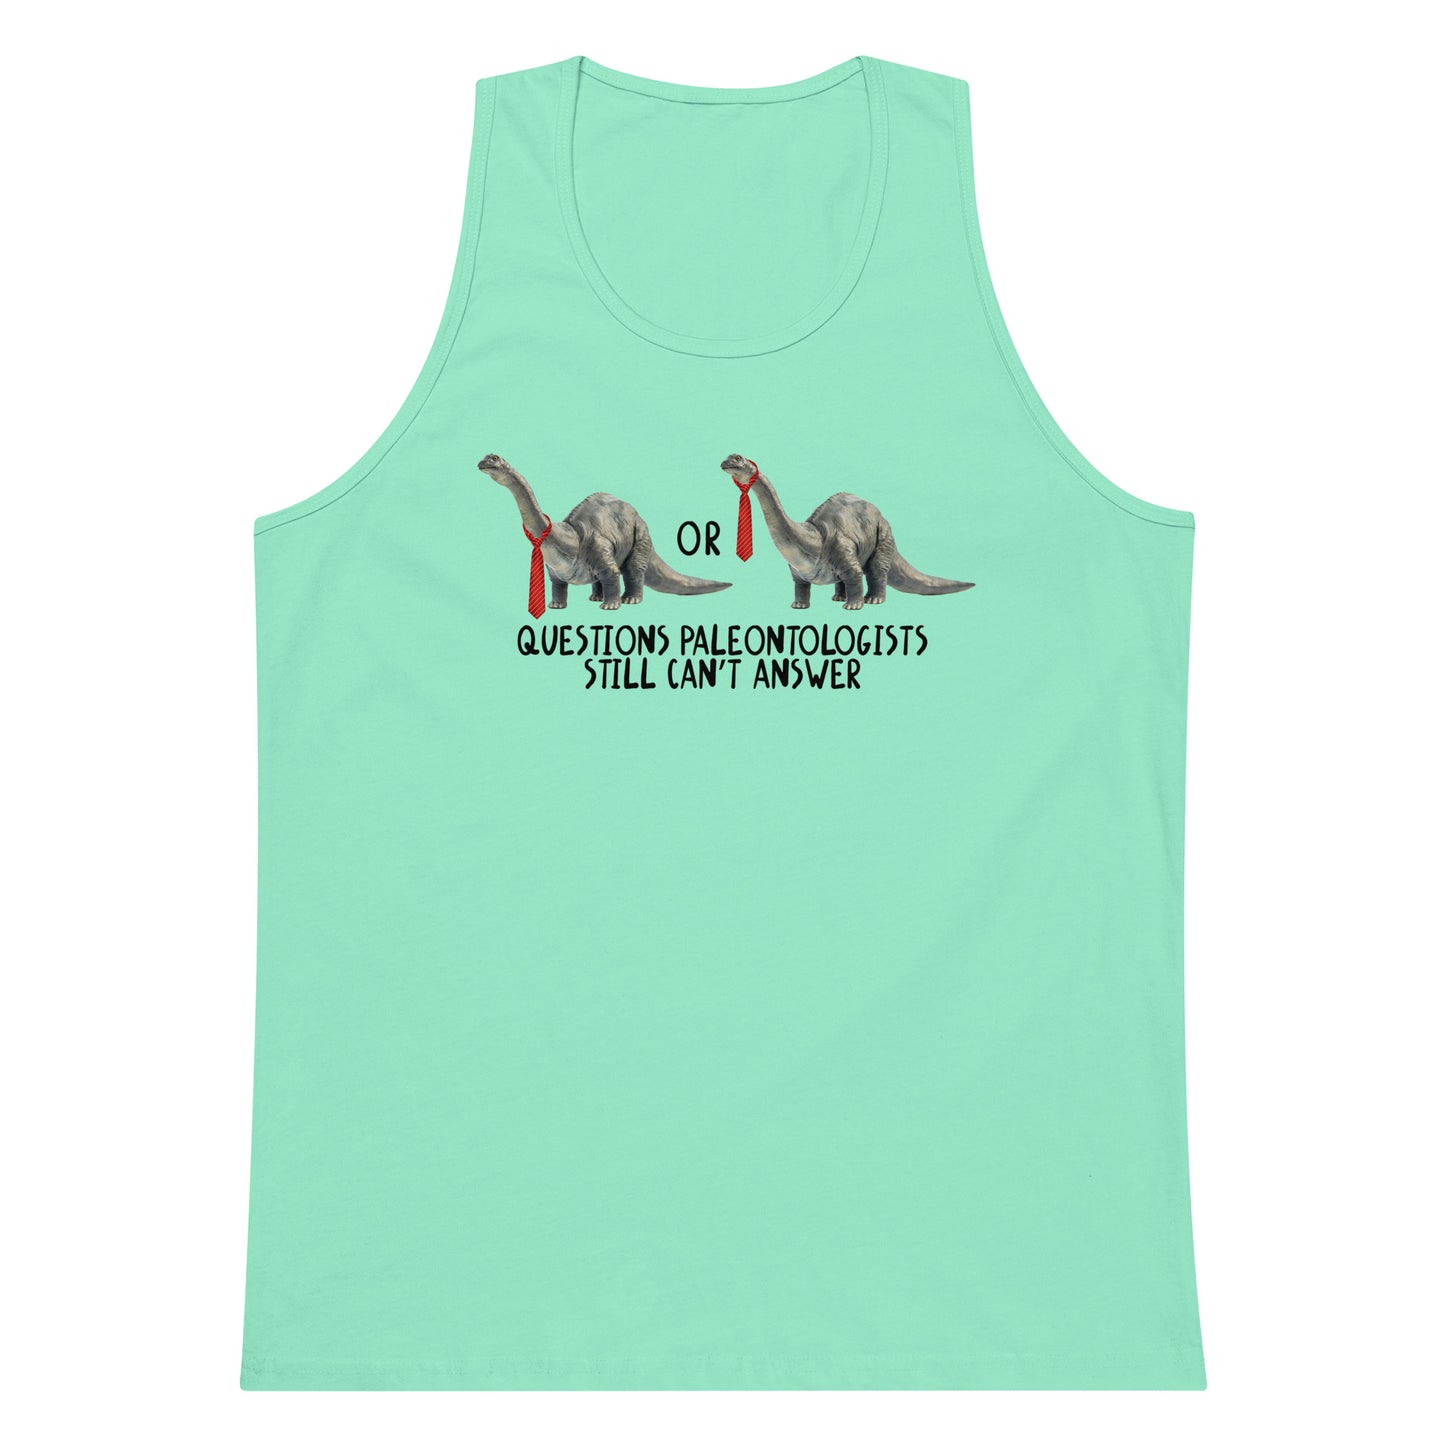 Questions Paleontologists Still Can’t Answer tank top